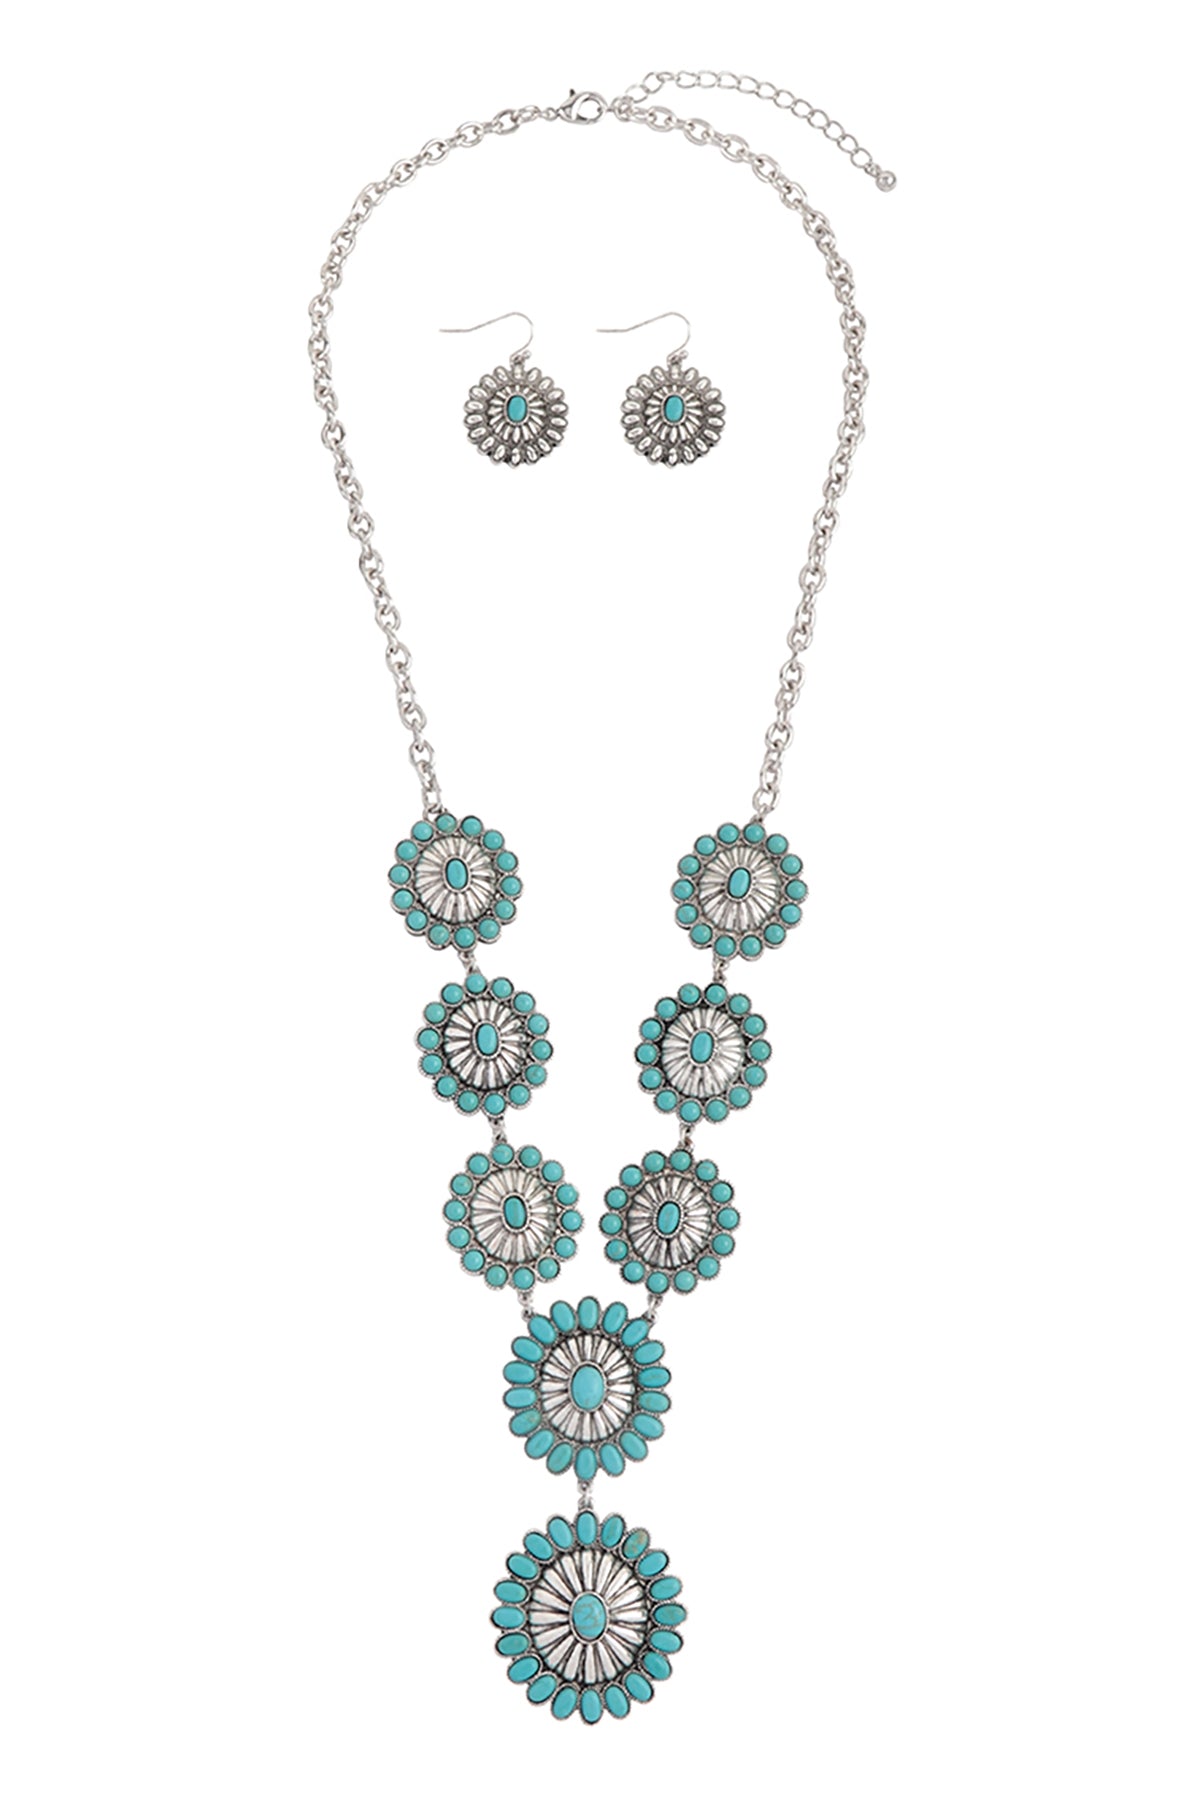 WESTERN CONCHO HAND CRAFT STONE NECKLACE AND EARRING SET (NOW $11.00 ONLY!)